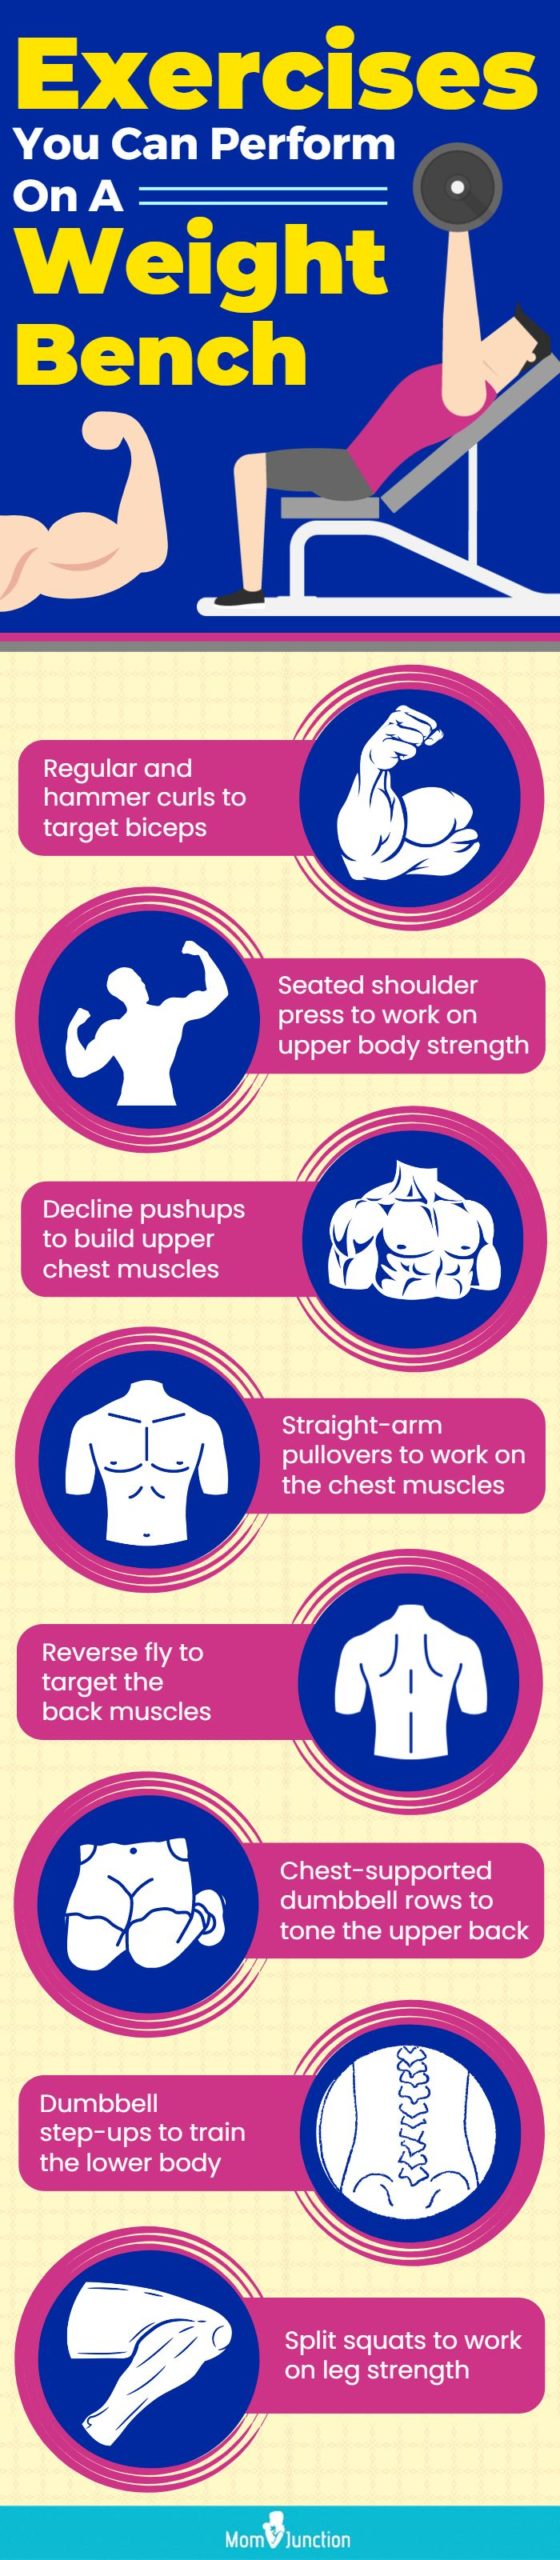 Exercises You Can Perform On A Weight Bench (infographic)